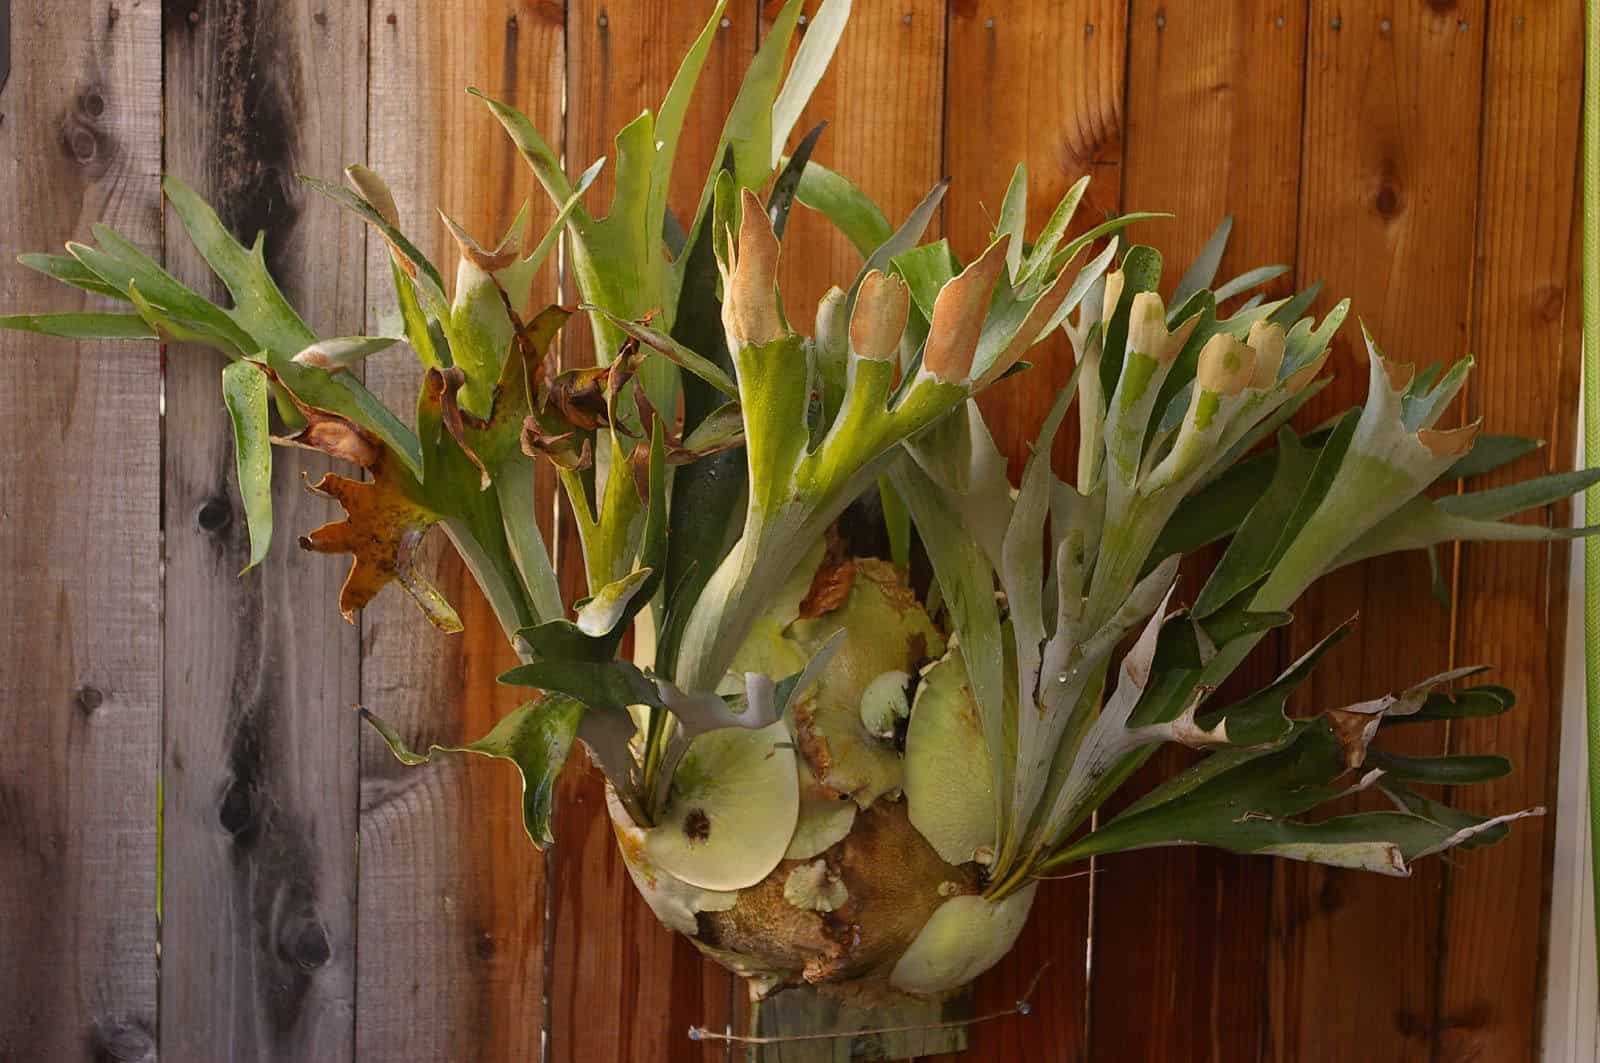 Large staghorn ferns mounted on a wooden background.